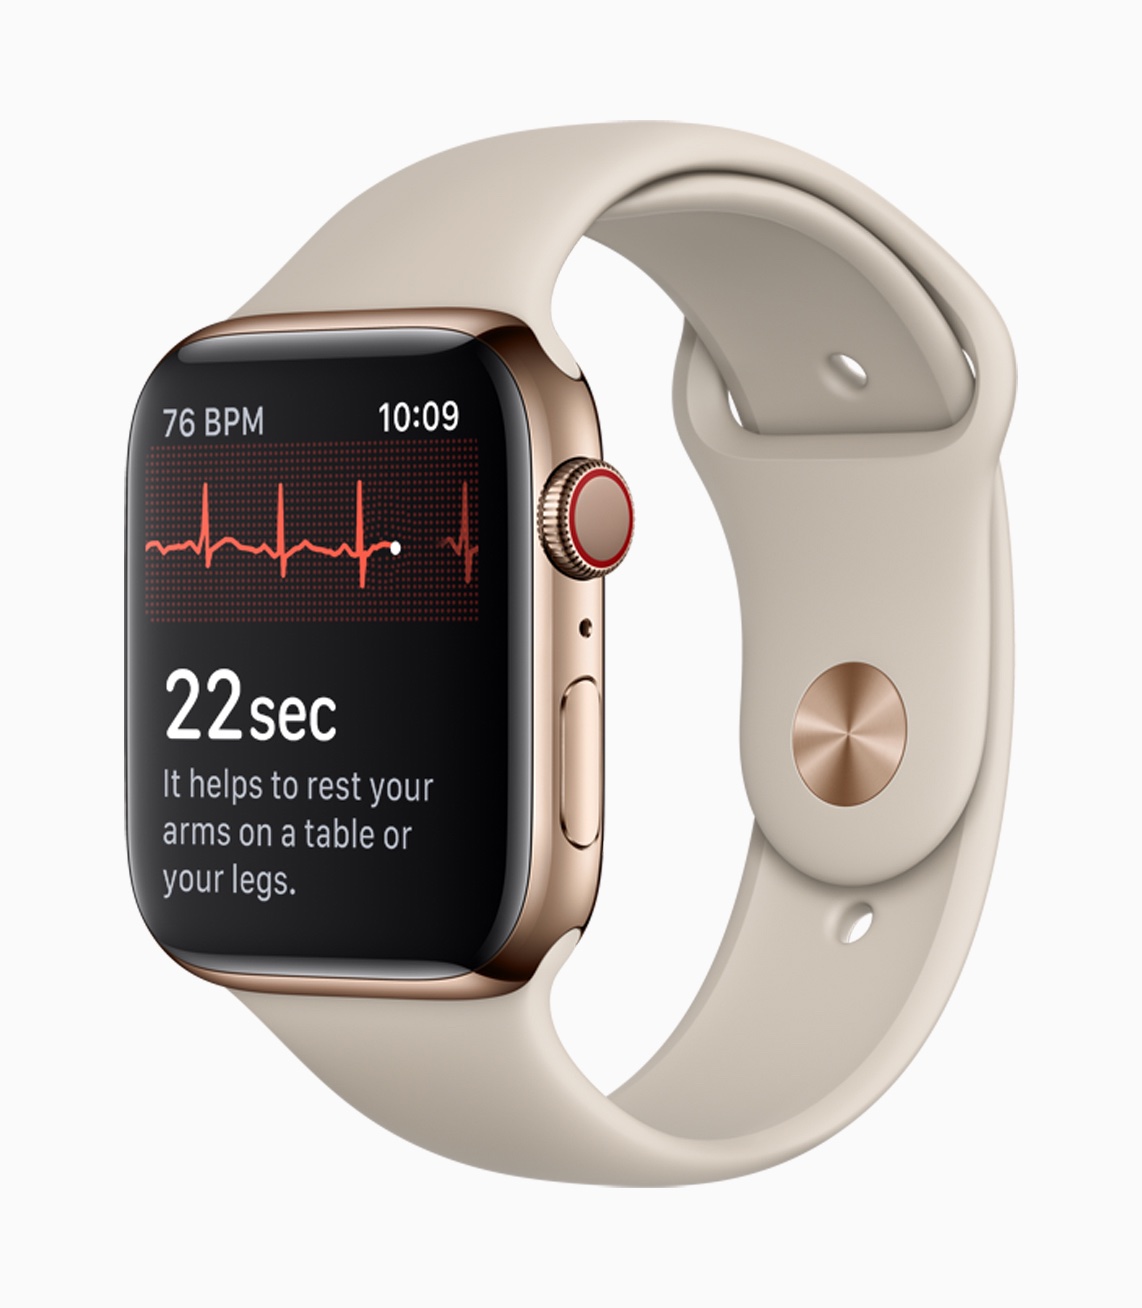 Johnson & Johnson announces research study with Apple Watch